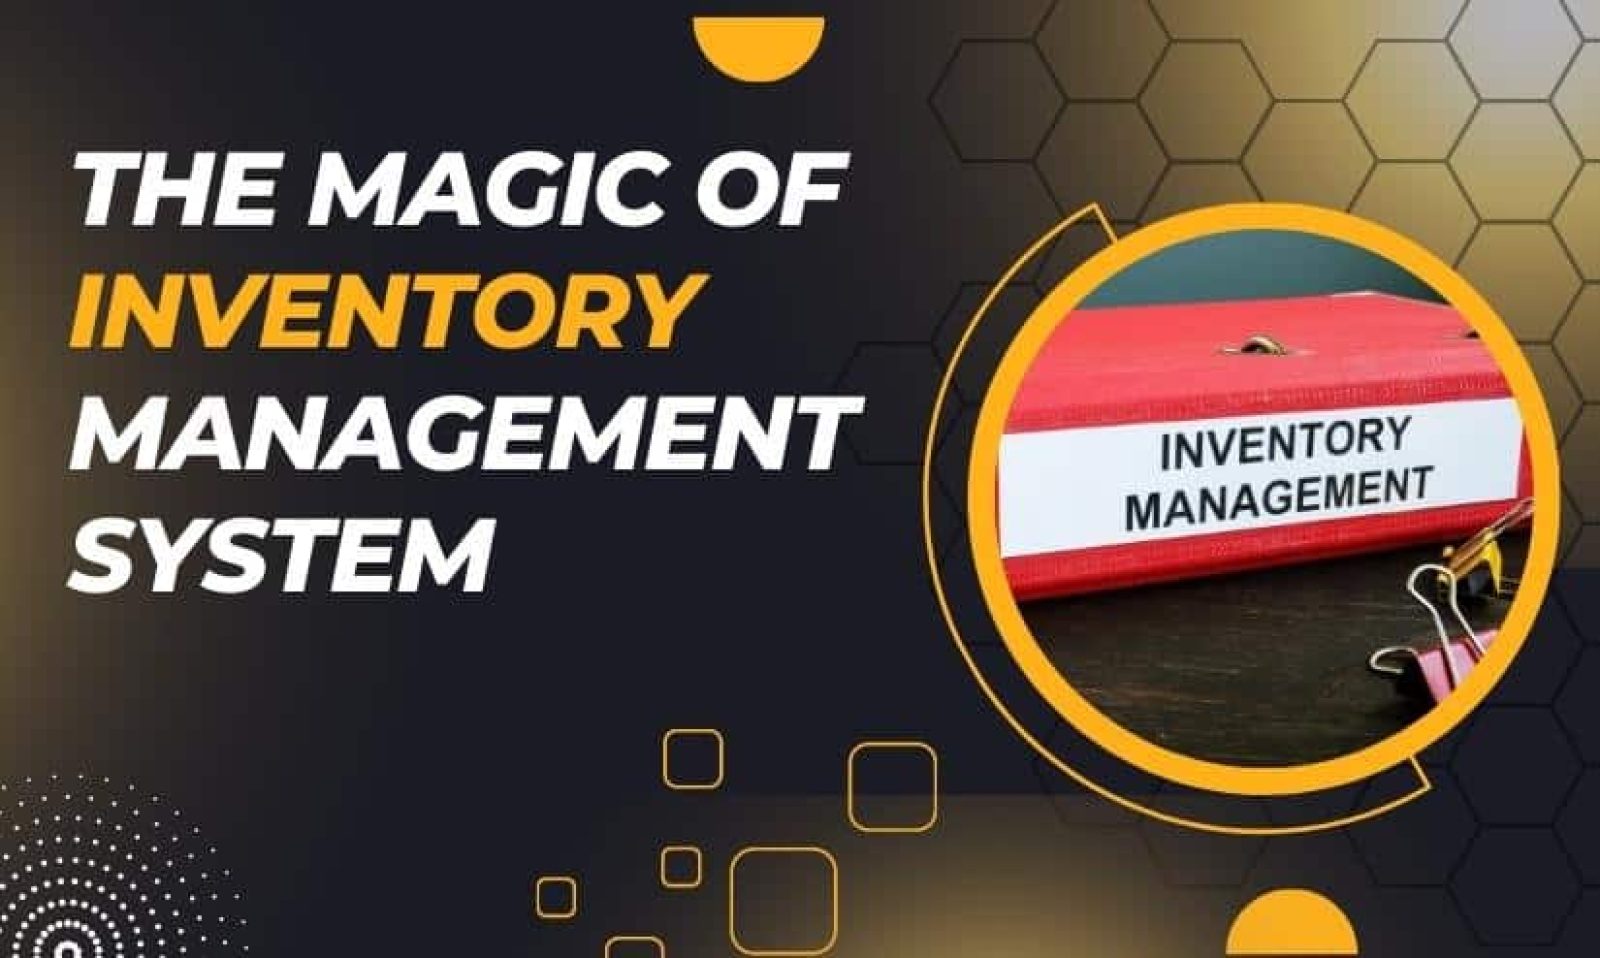 The Magic of Inventory Management System